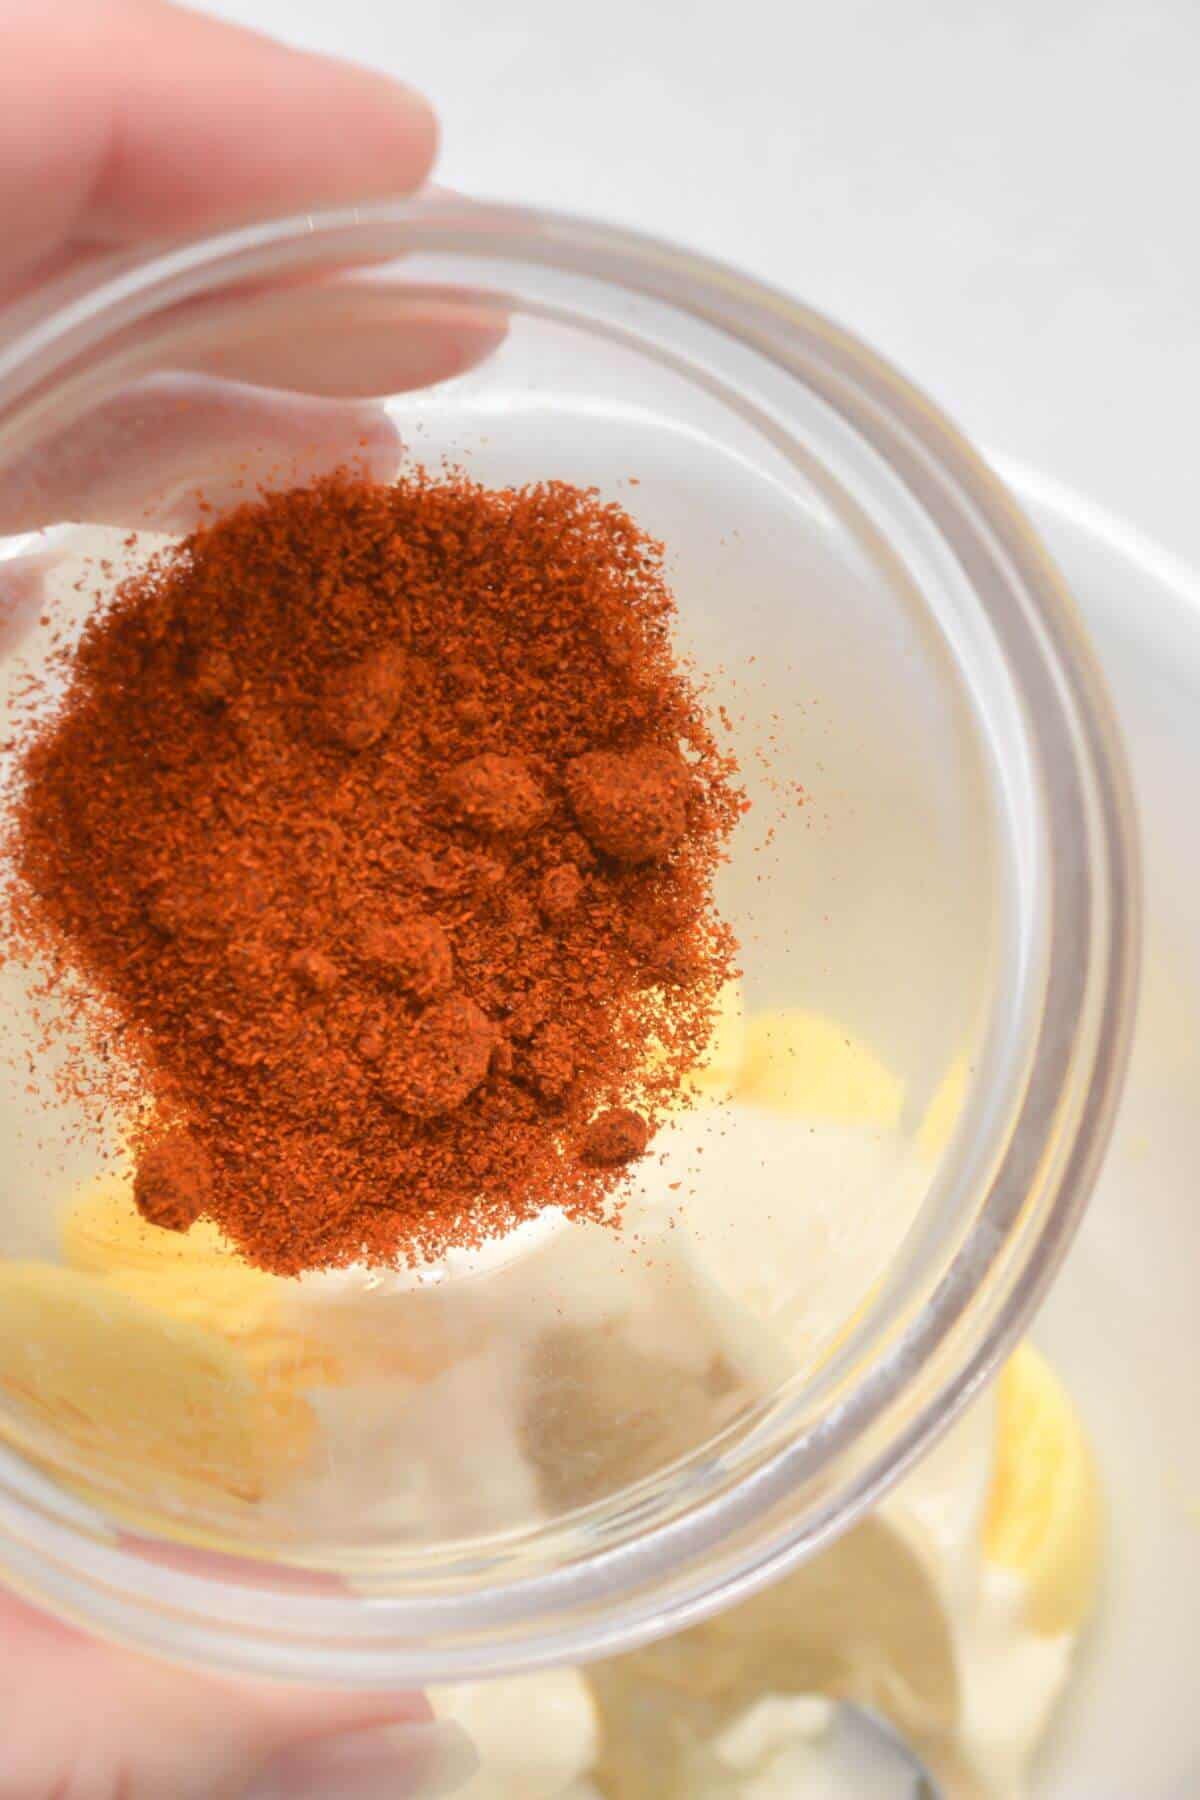 A person is holding a bowl of paprika in their hand.